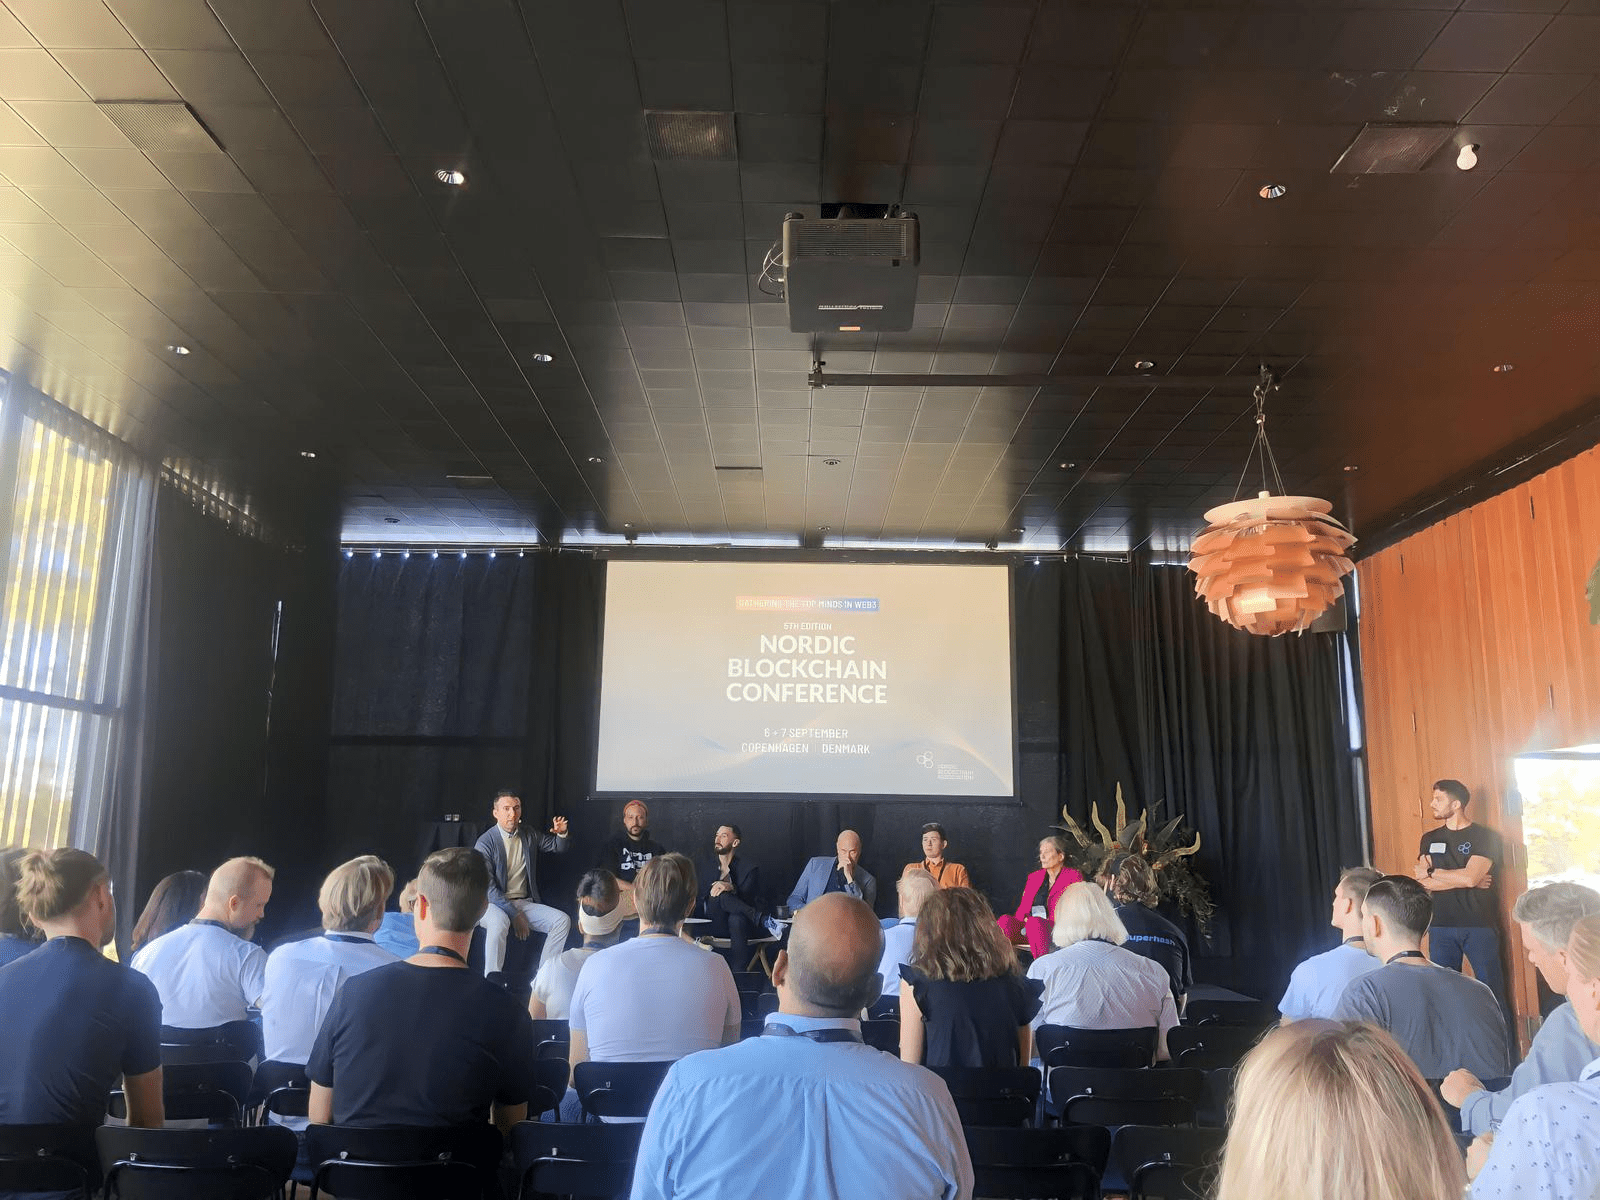 The latest Nordic Blockchain Conference shows Denmark is a hub for Web3 innovation